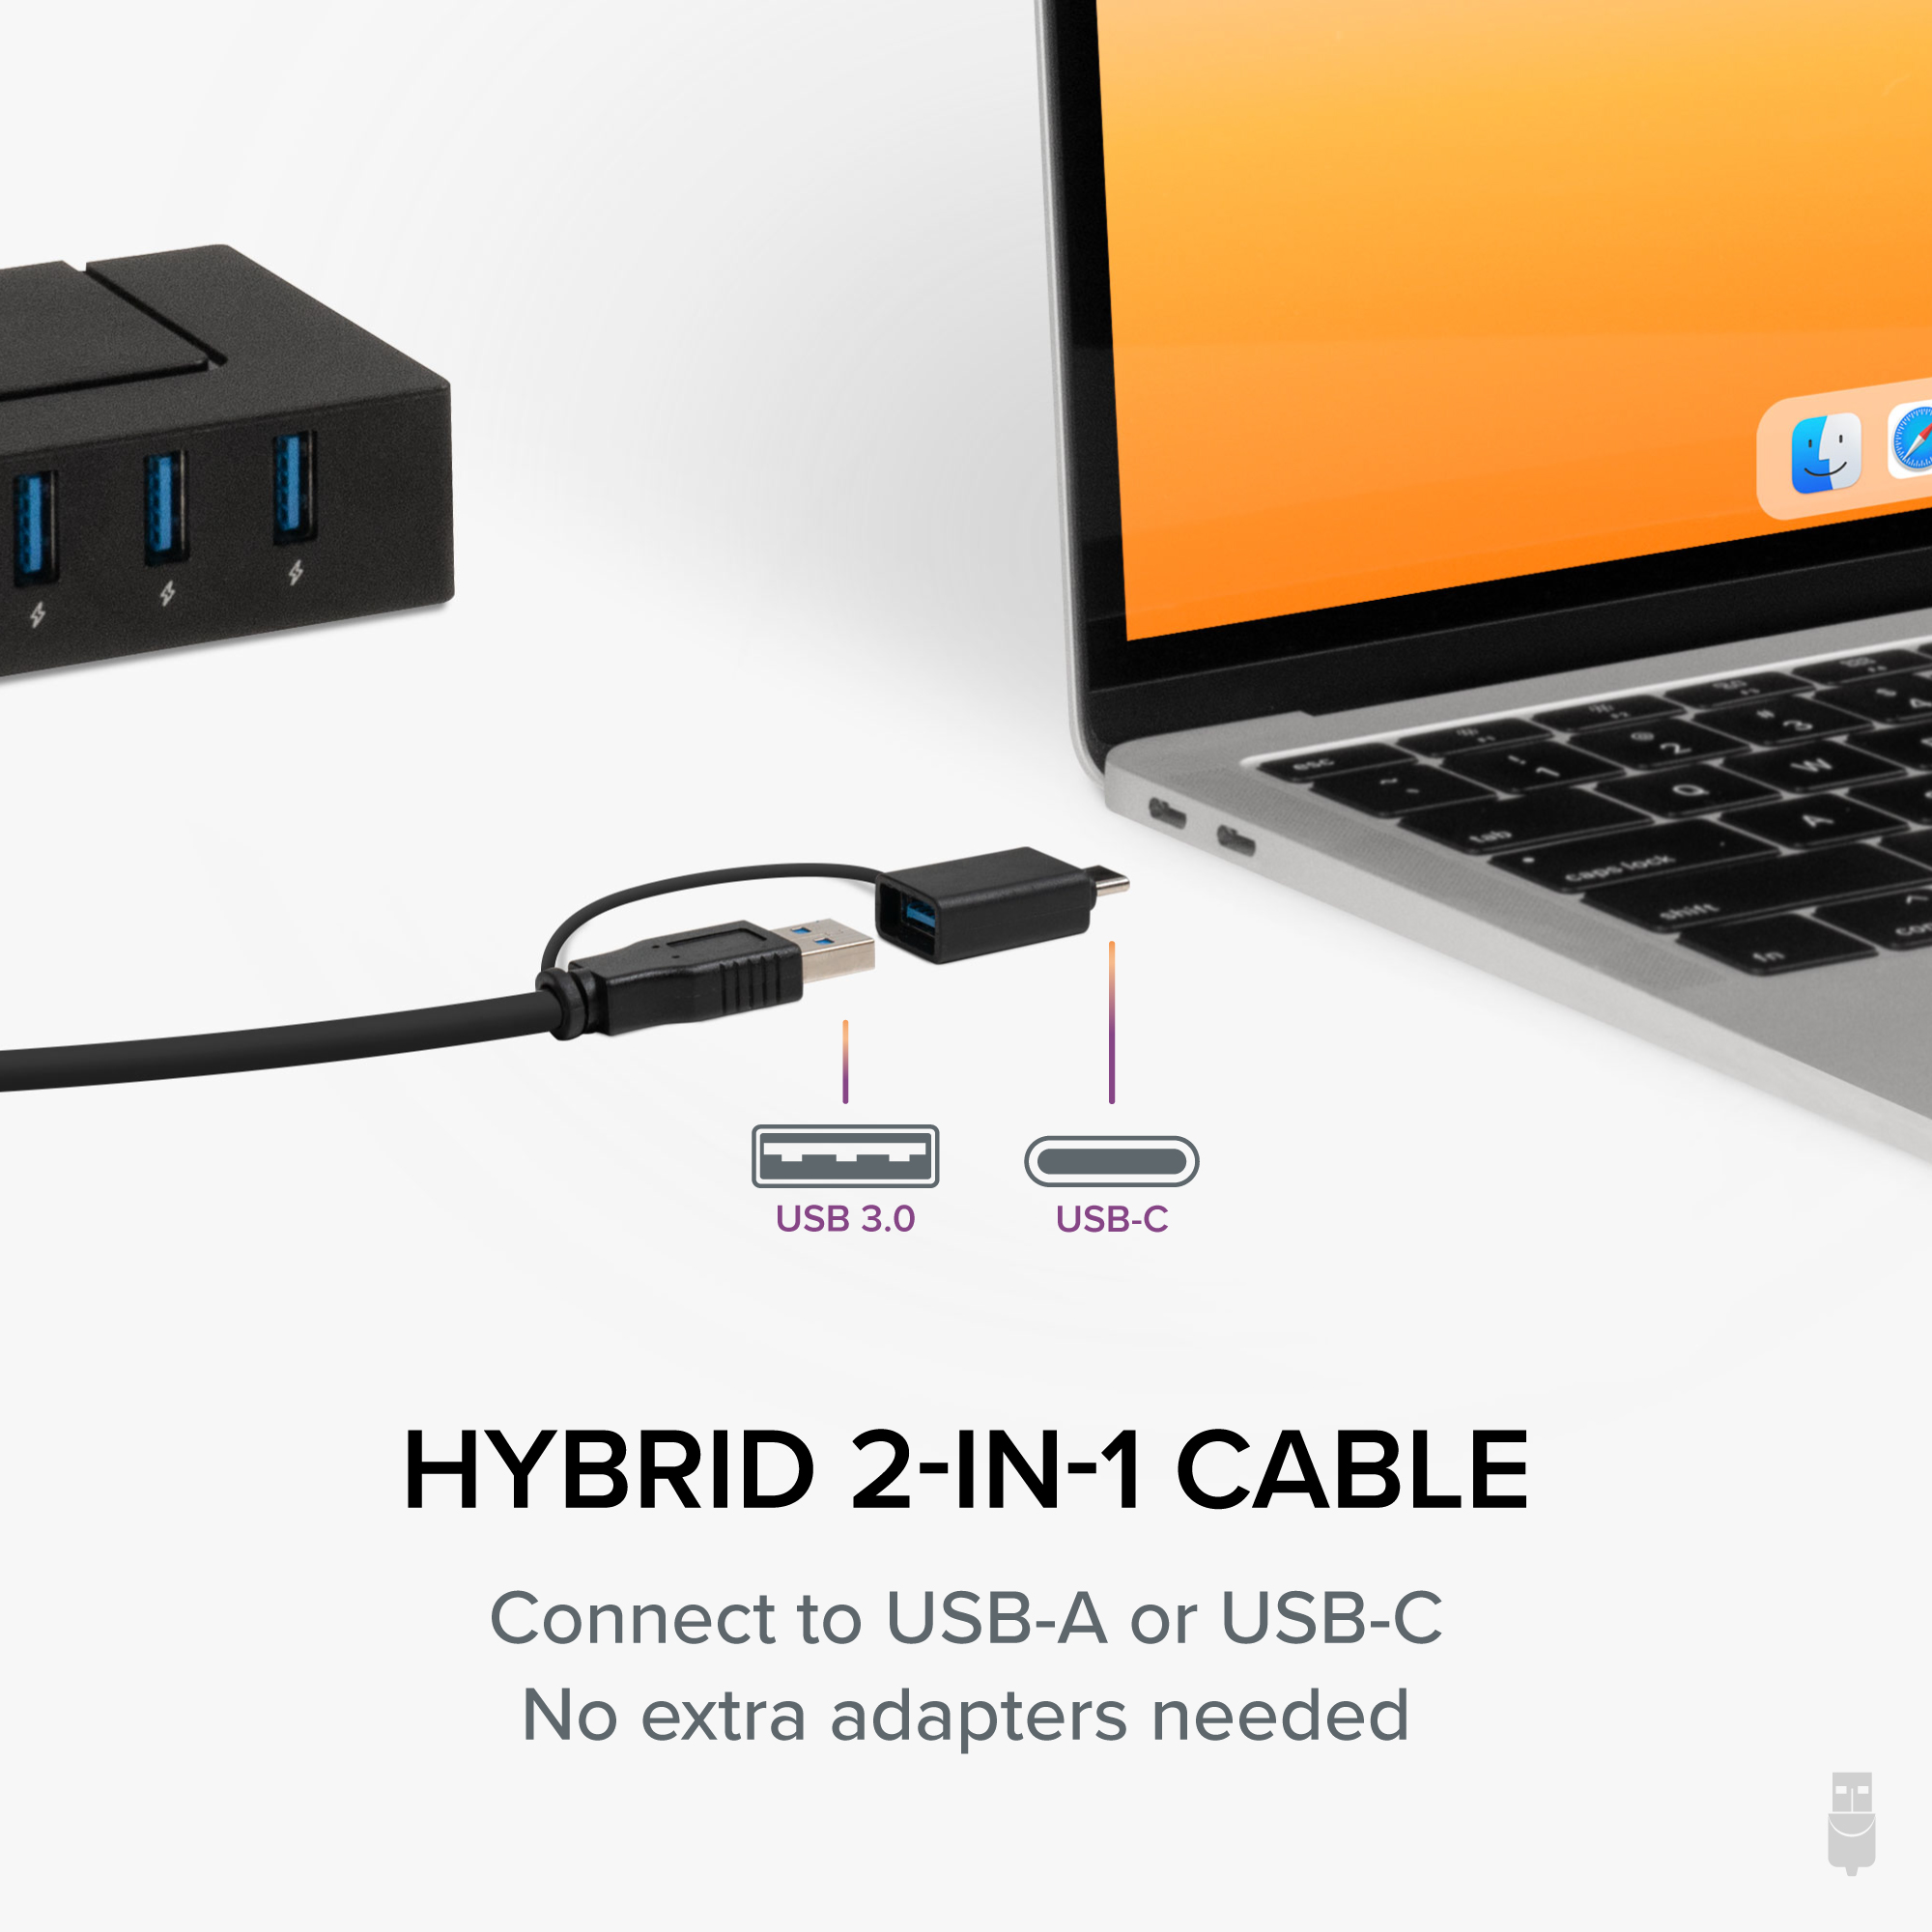 Plugable 7-in-1 USB Powered Hub for Laptops with USB-C or USB 3.0 - USB Power Station for Multiple Devices and USB Data Transfer with a 60W Power Adapter - image 4 of 9